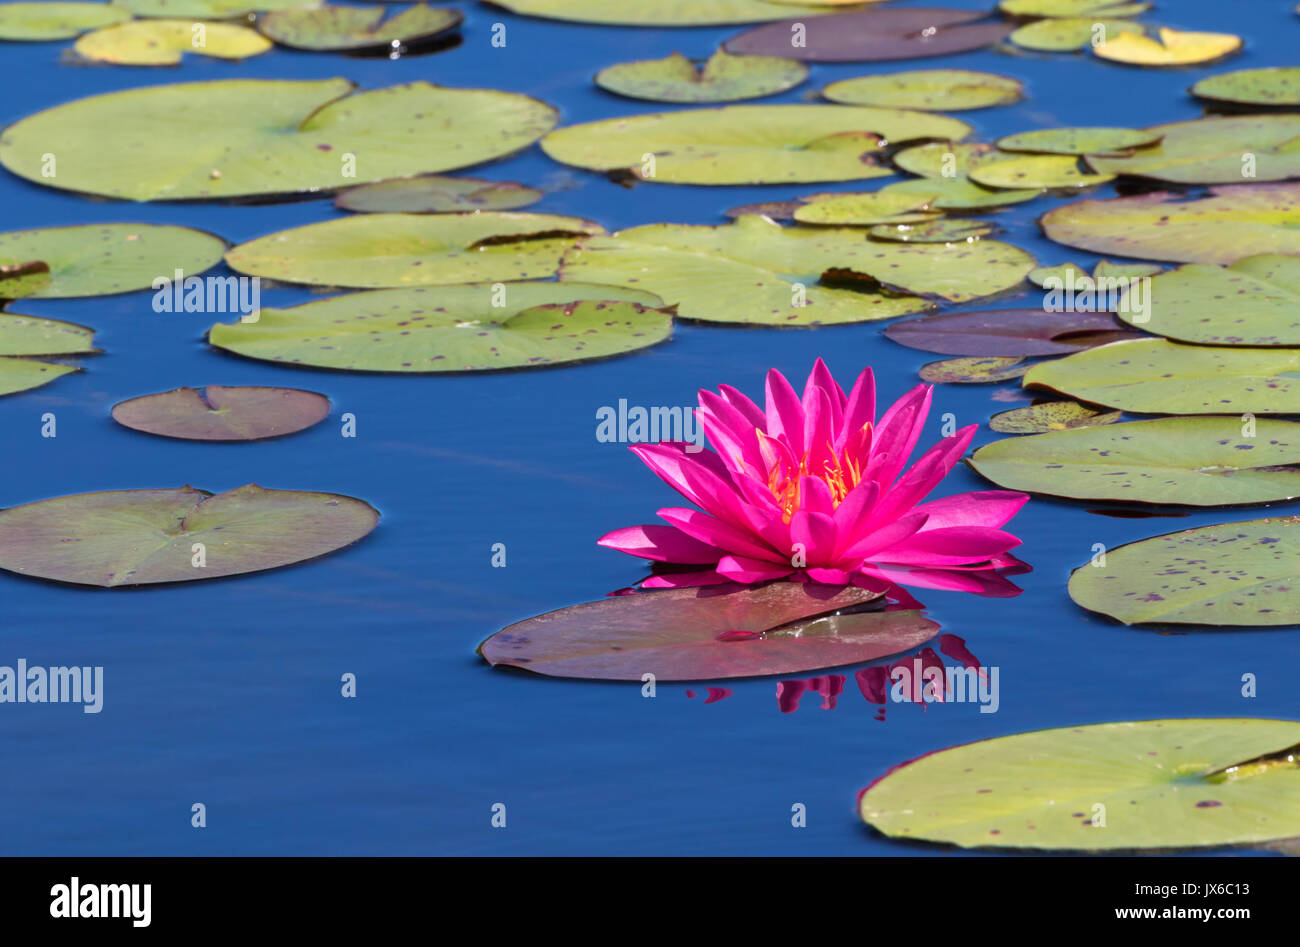 Bright pink water lily duplicates  in the blue water Stock Photo